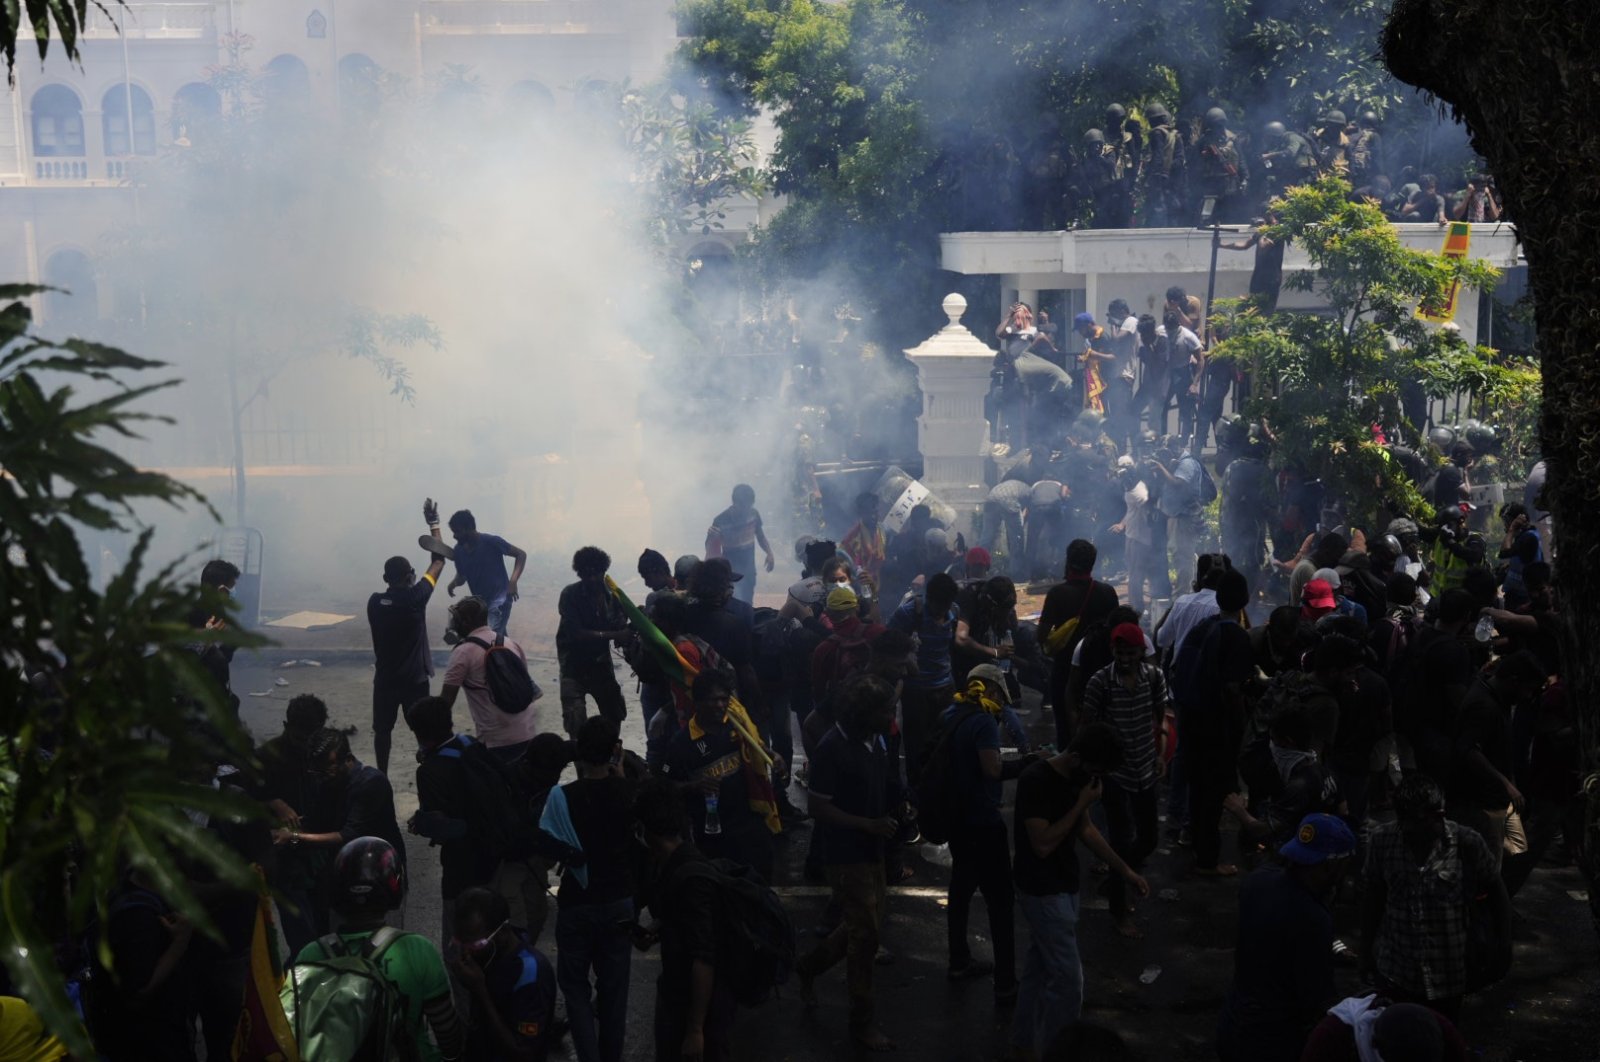 Police use teargas as protesters storm the compound of Prime Minister Ranil Wickremesinghe&#039;s office, demanding he resign, Colombo, Sri Lanka, July 13, 2022. (AP Photo)